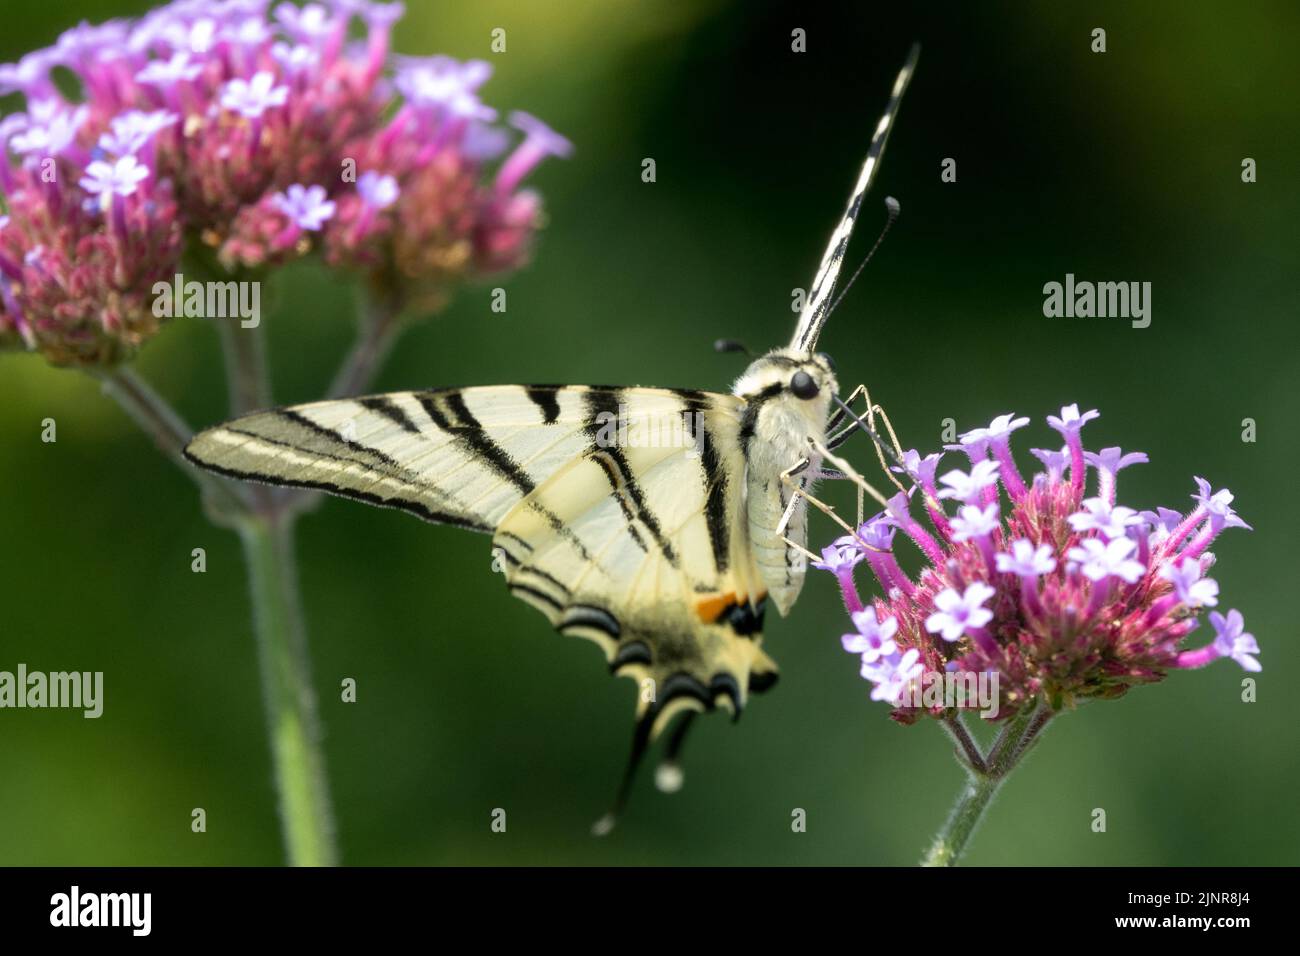 Iphiclides podalirius, Scarce Swallowtail Butterfly, Nectaring on Flower, Verbena bonariensis, Butterfly flower, Close up Stock Photo